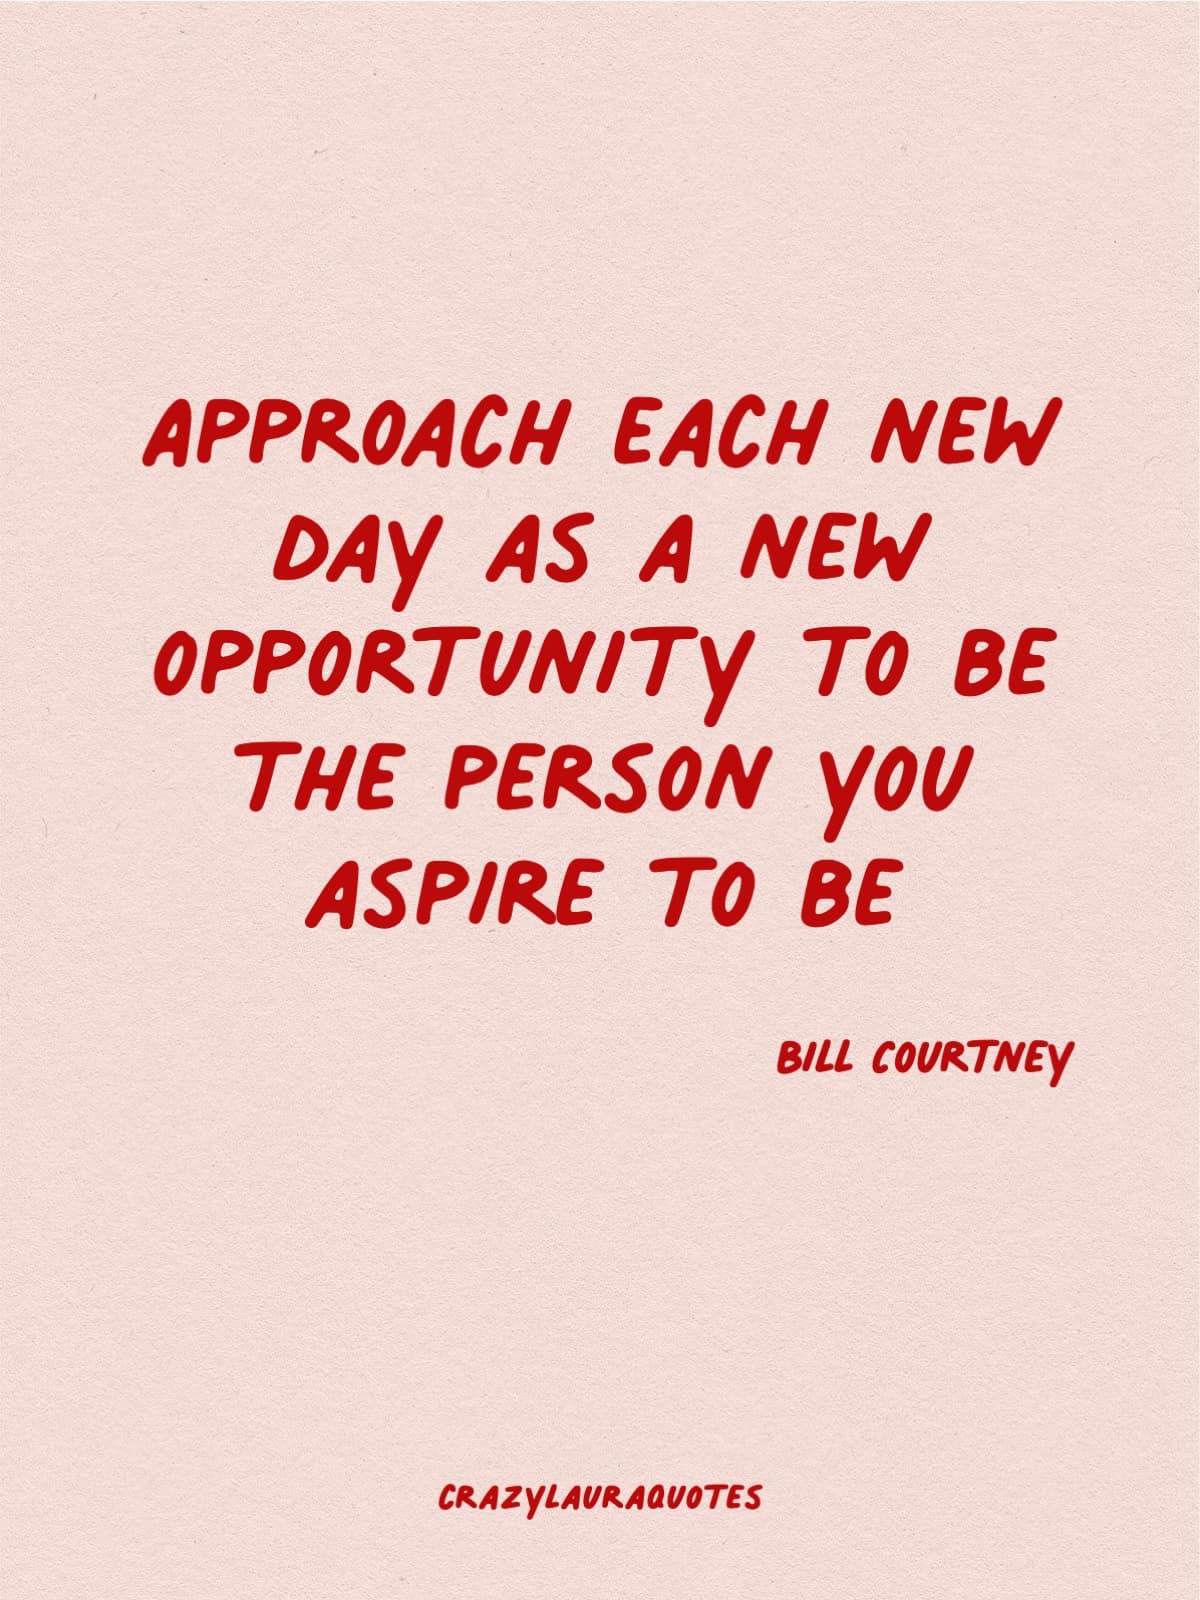 new opportunity each day bill courtney